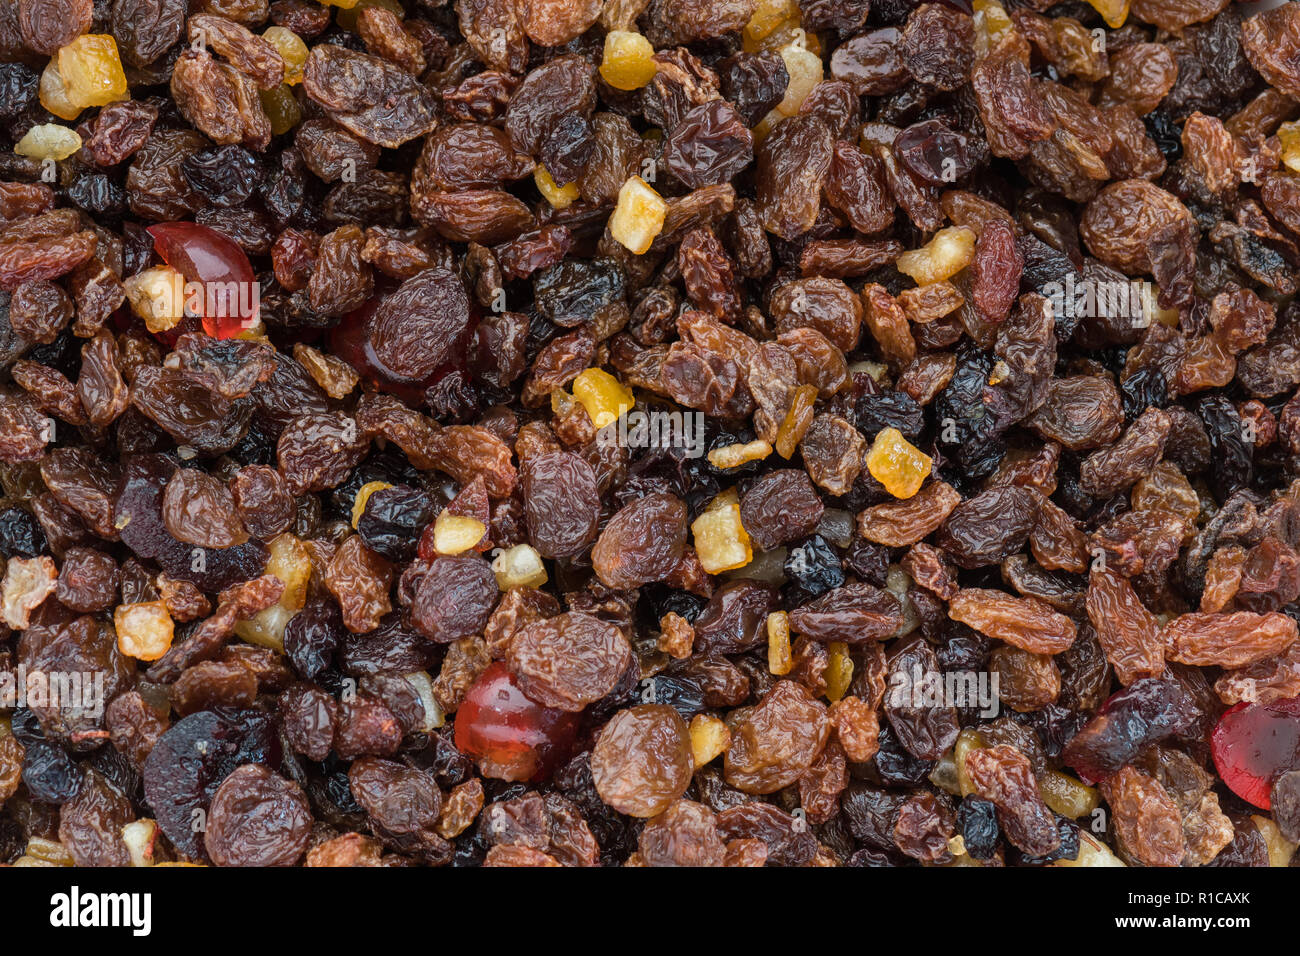 dried fruits soaking in alcohol for christmas fruitcake Stock Photo